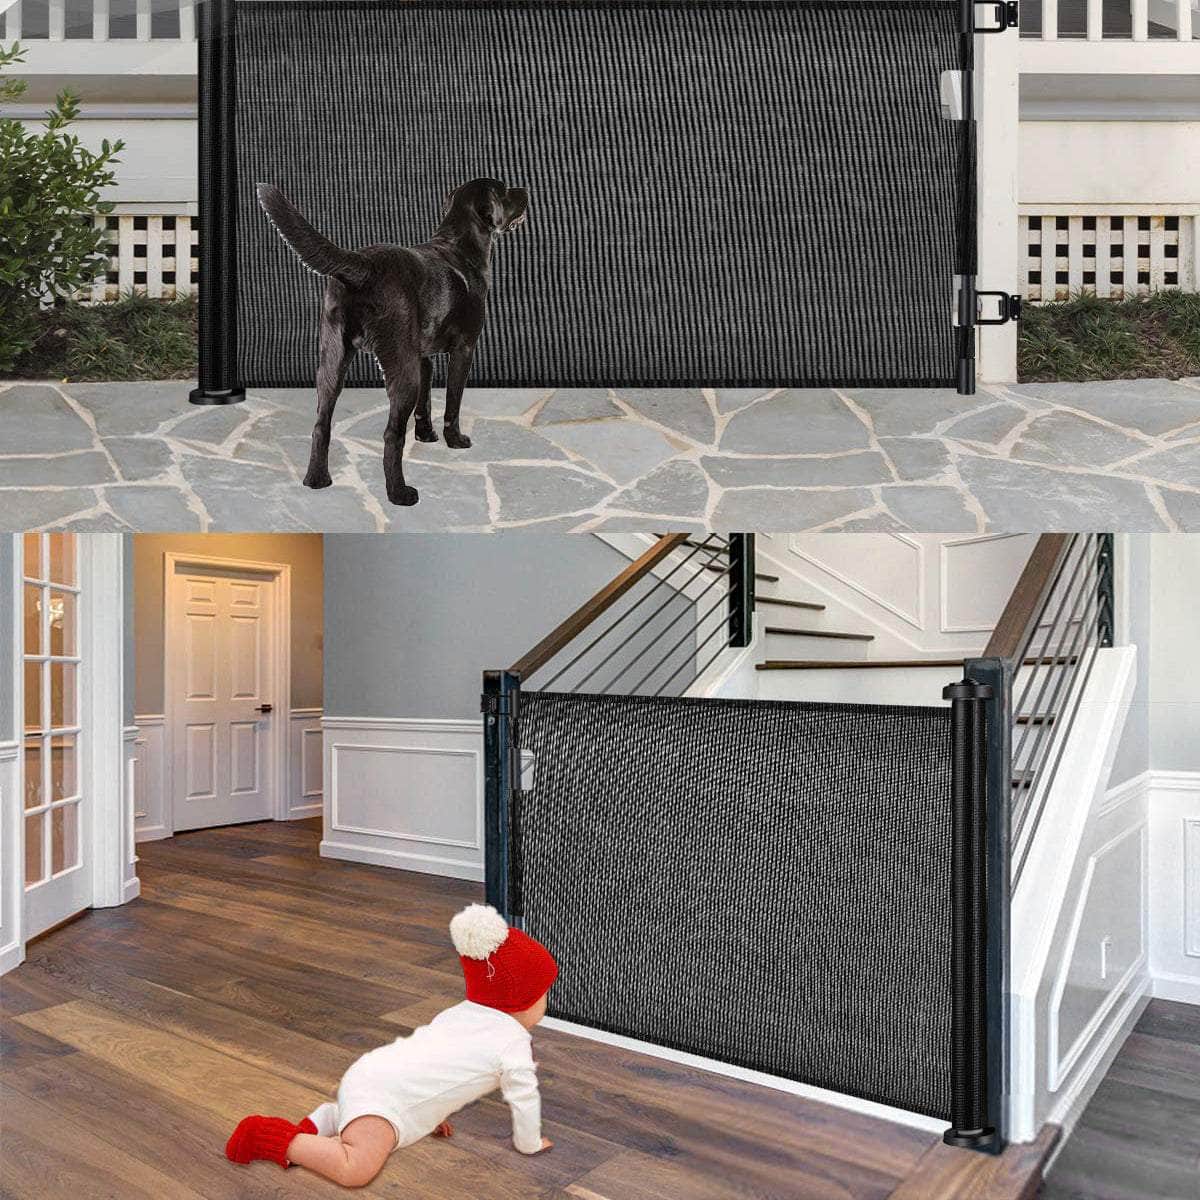 SafeGuard 1.5M Retractable Pet Gate for Indoor-Outdoor Security